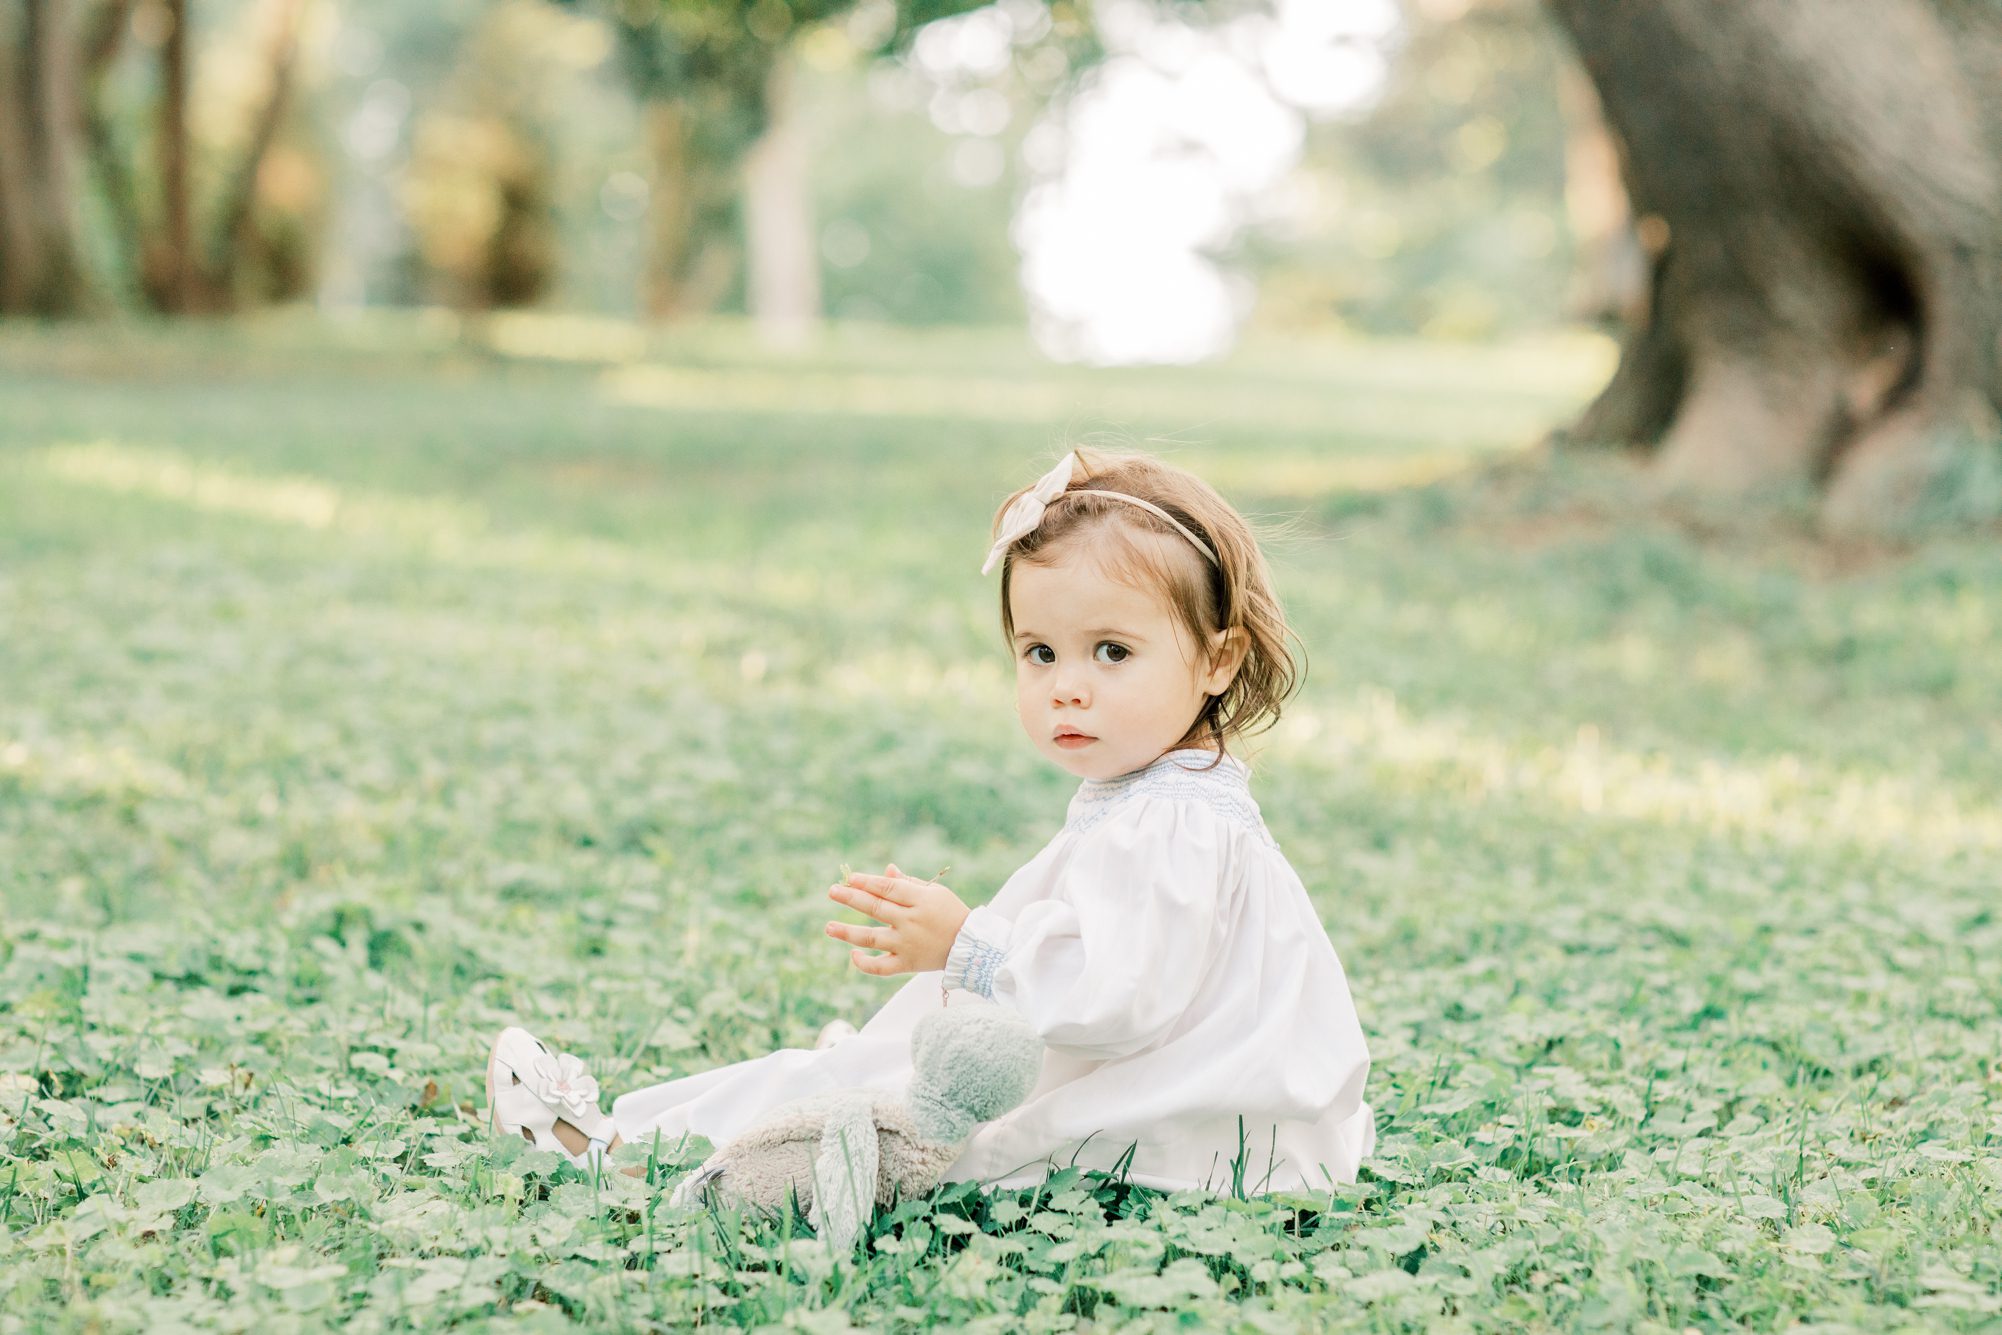 Little girl sitting in grass during family session. Photo by LRG Portraits.